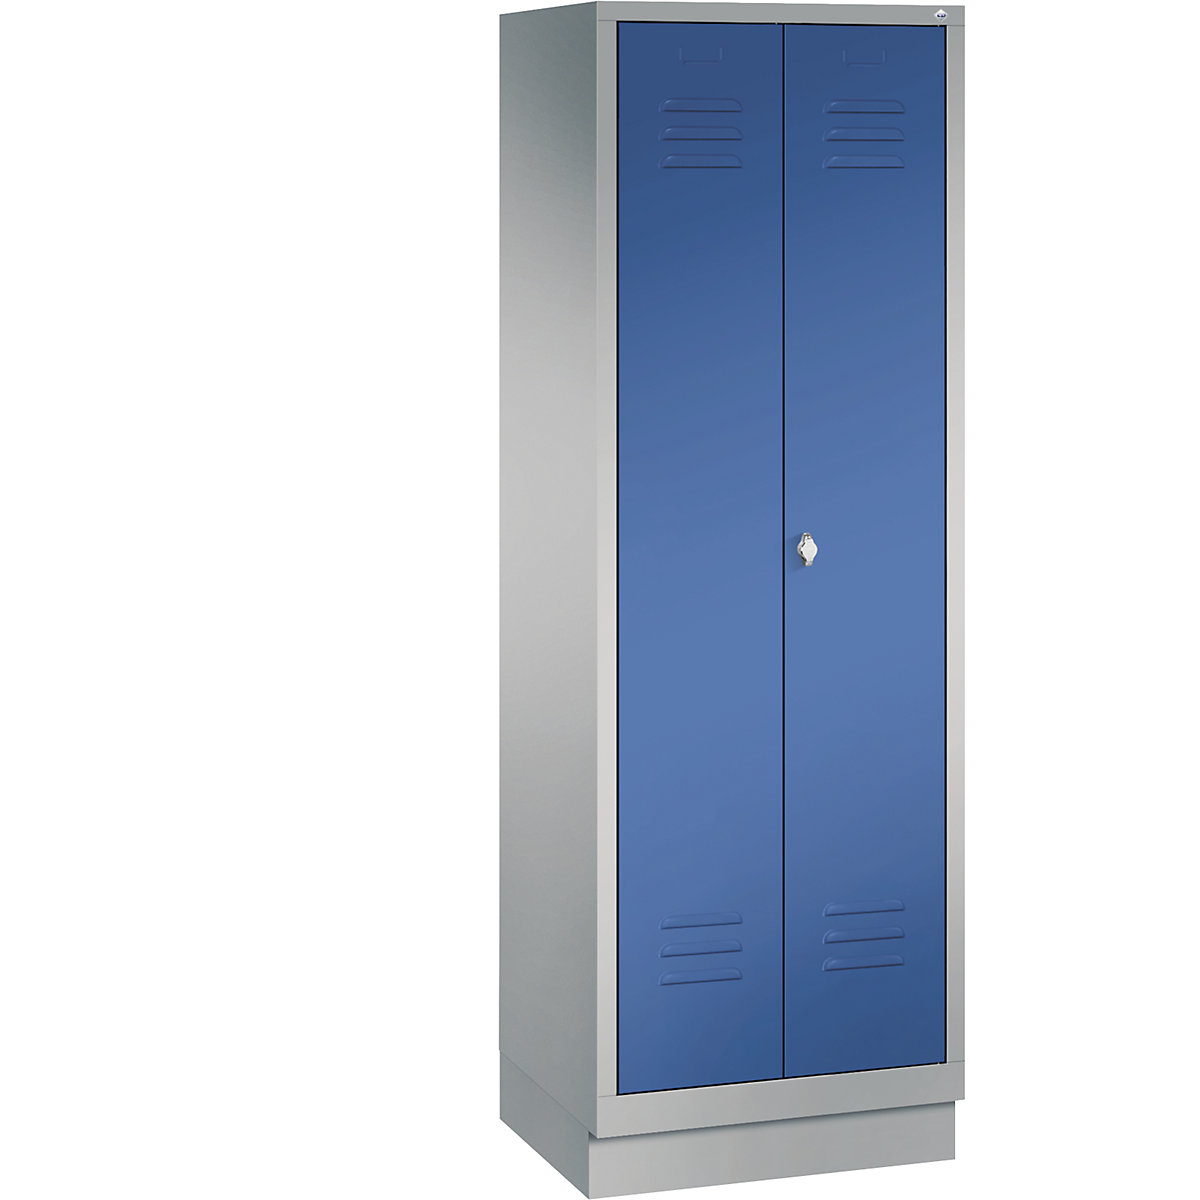 CLASSIC cloakroom locker with plinth, doors close in the middle – C+P, 2 compartments, compartment width 300 mm, white aluminium / gentian blue-5